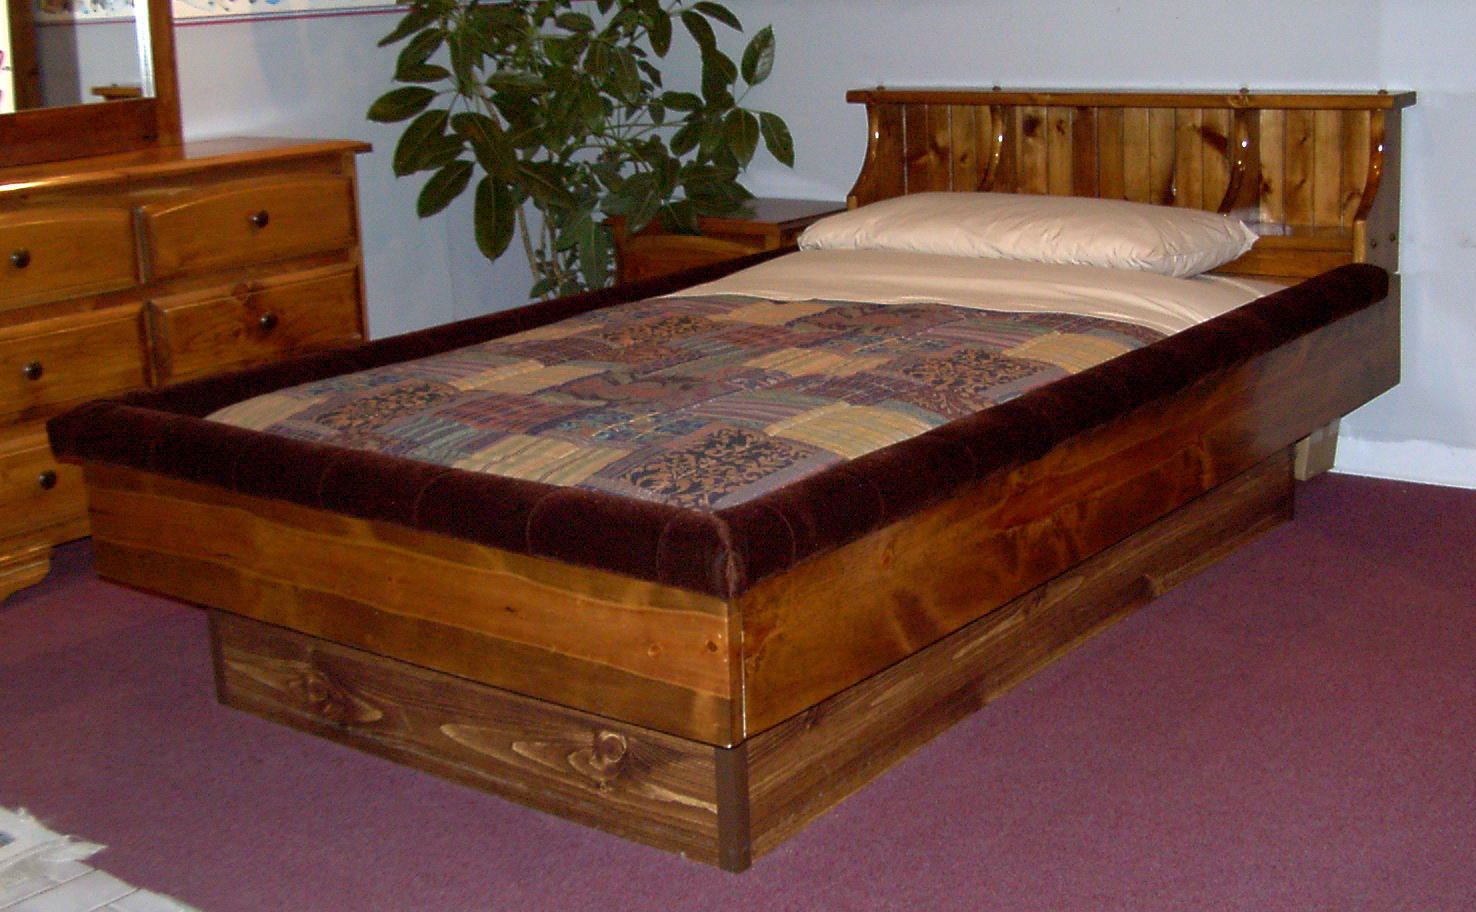 The Classic Bookshelf Solid Pine, Can You Put A Mattress In Waterbed Frame